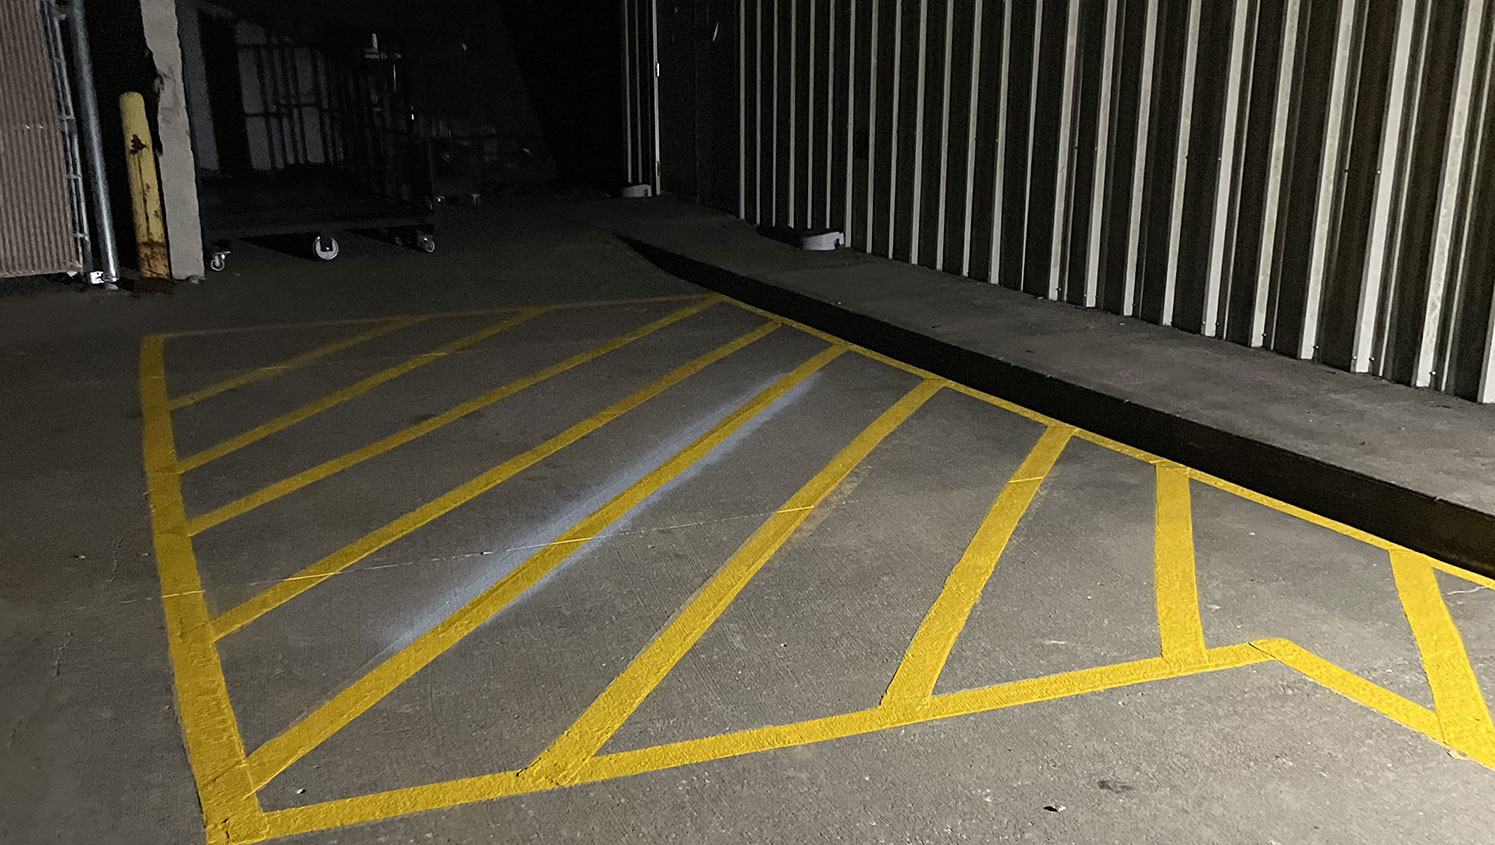 newly striped safety markings